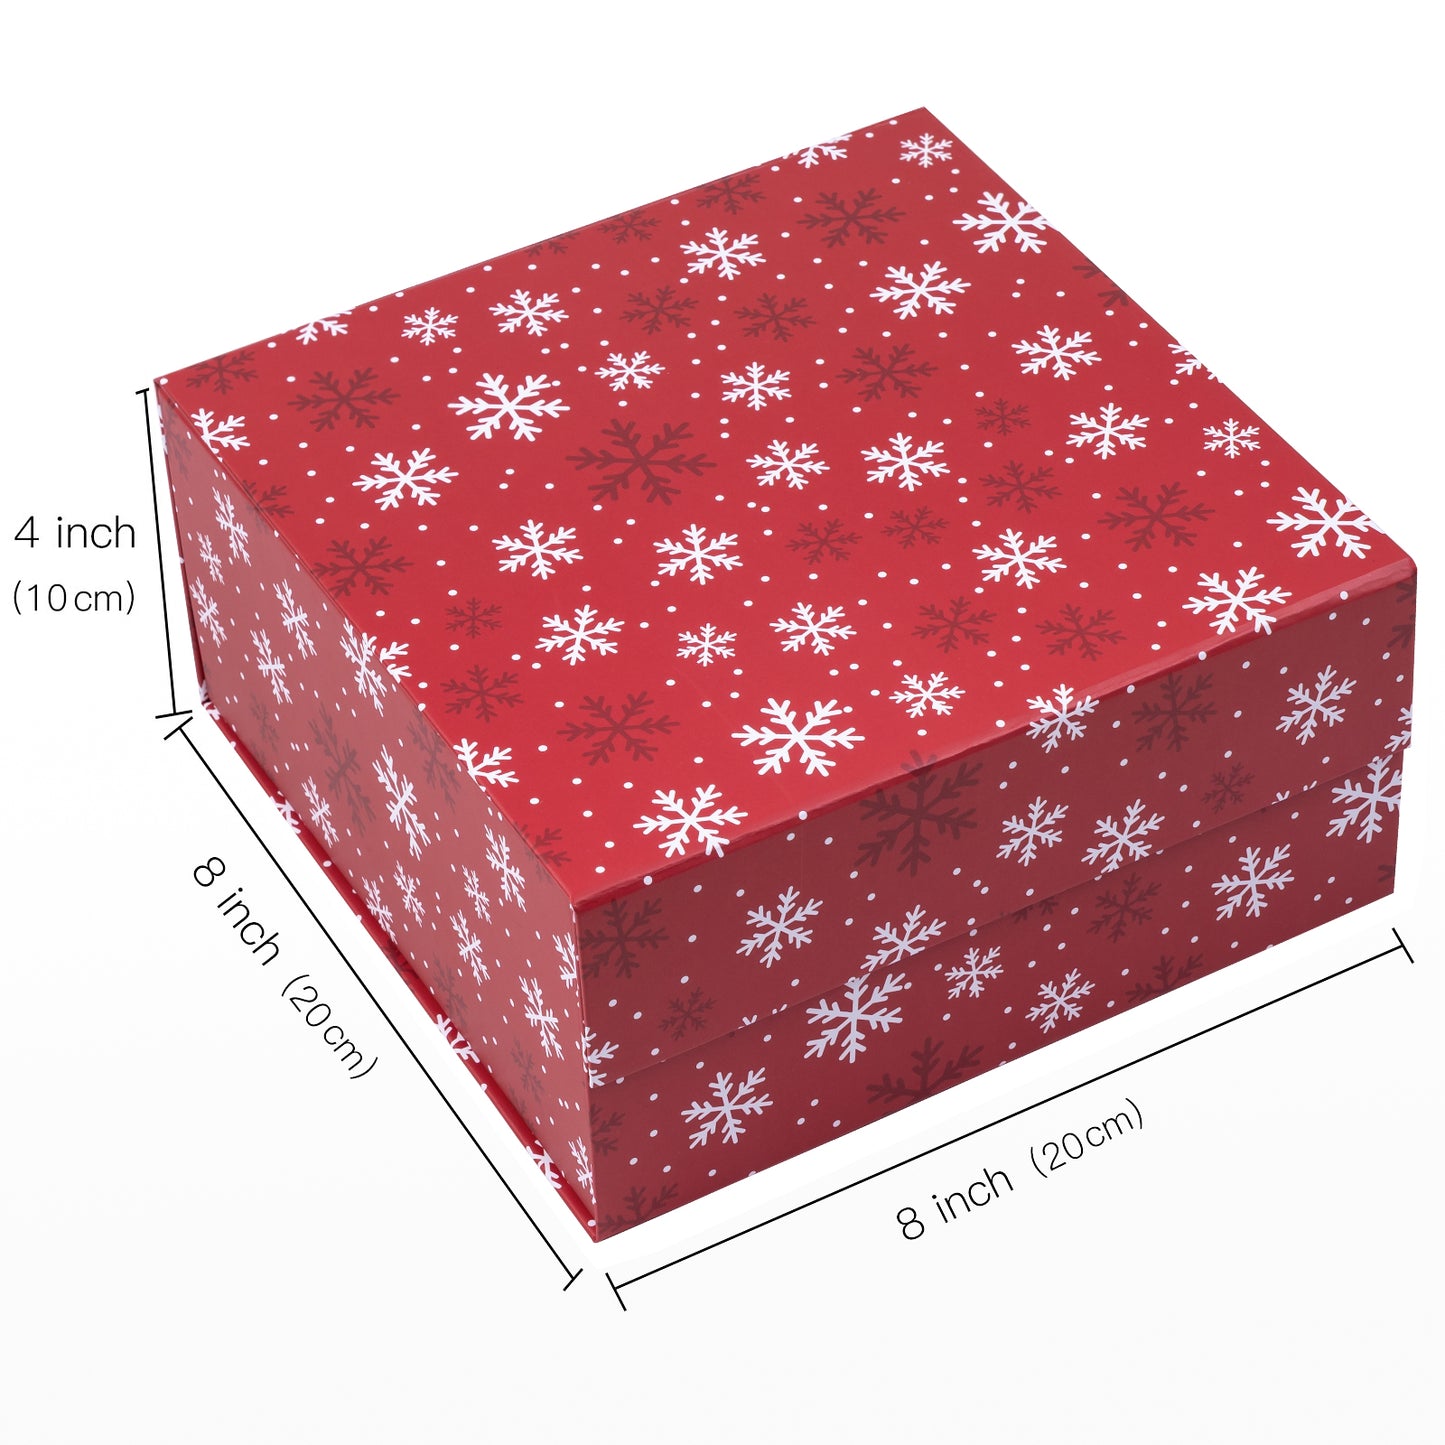 20x20x10cm Collapsible Gift Box Magnetic Closure Snow Flake Red Wedding Party Wrapping